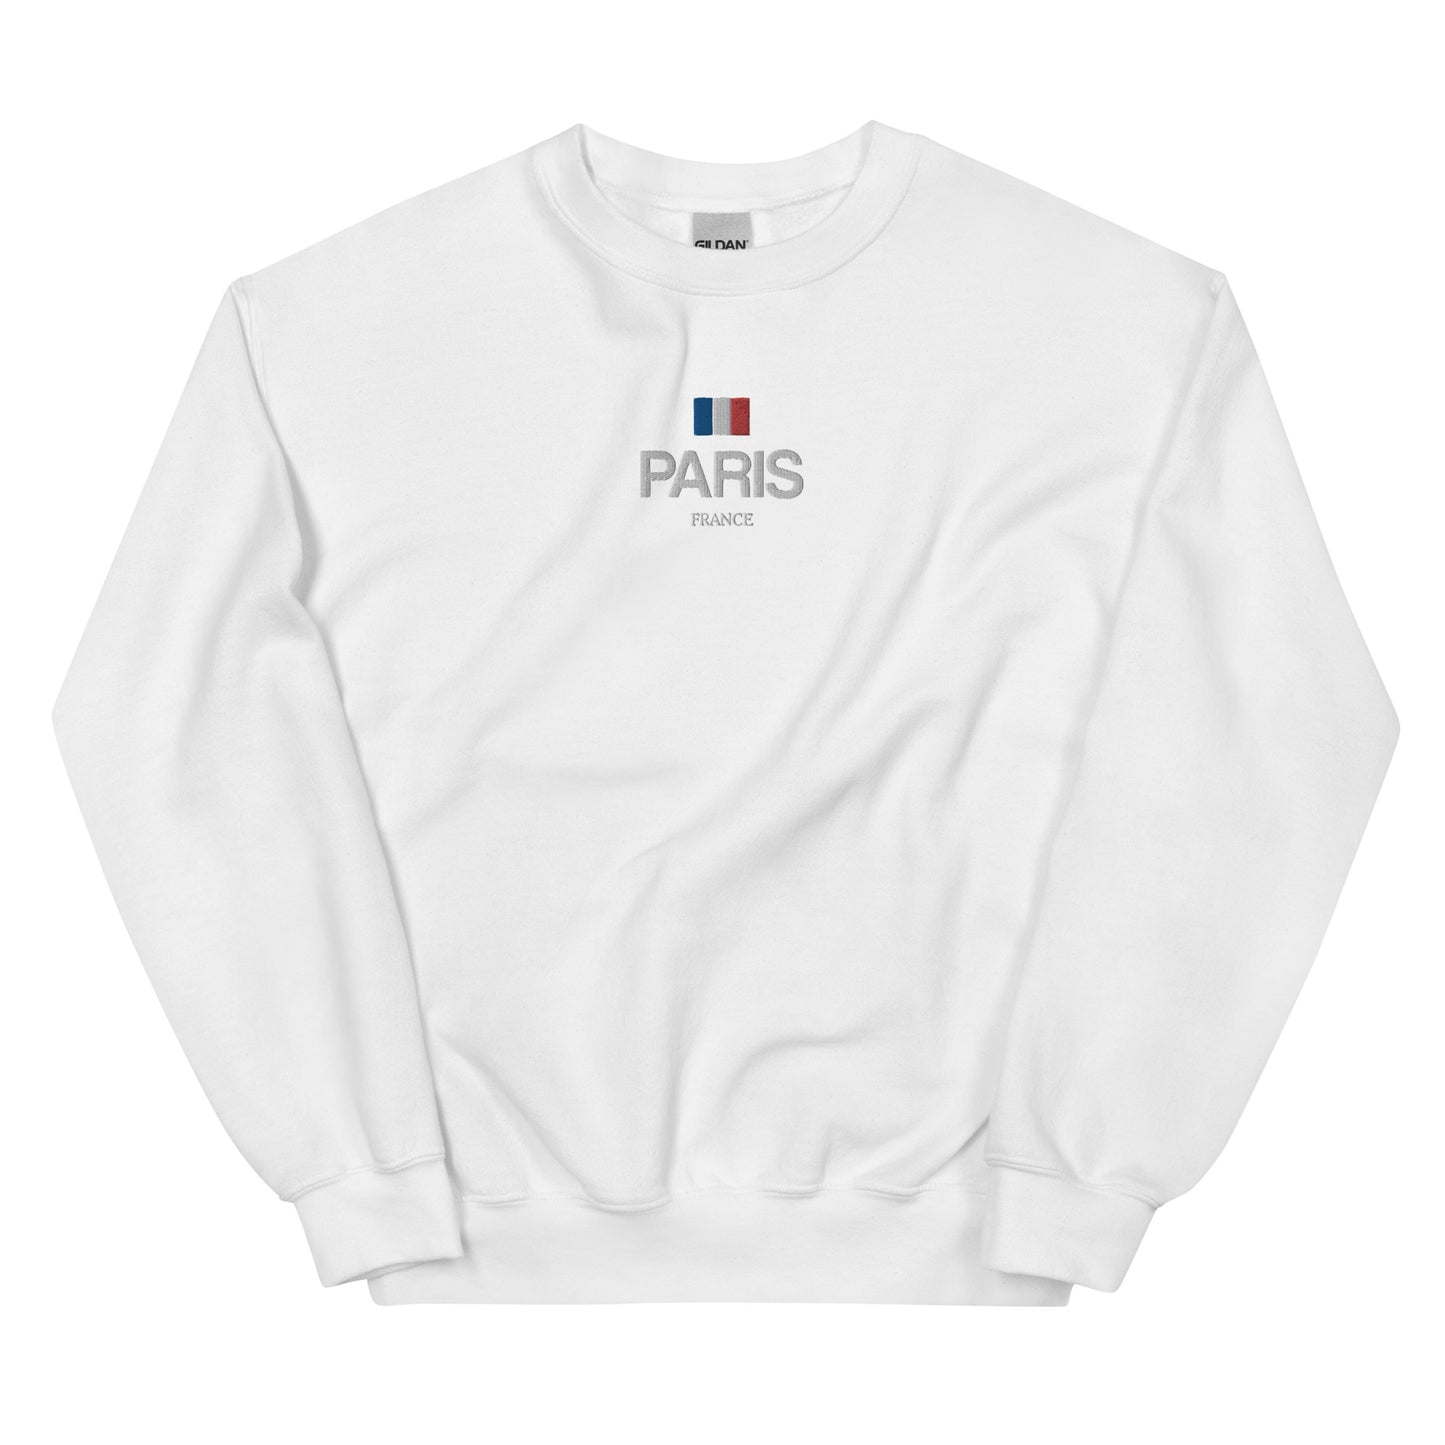 Paris France Embroidered Sweatshirt, Vintage City Travel Crewneck sweater Graphic Pullover Men Women Aesthetic Top Gifts Starcove Fashion